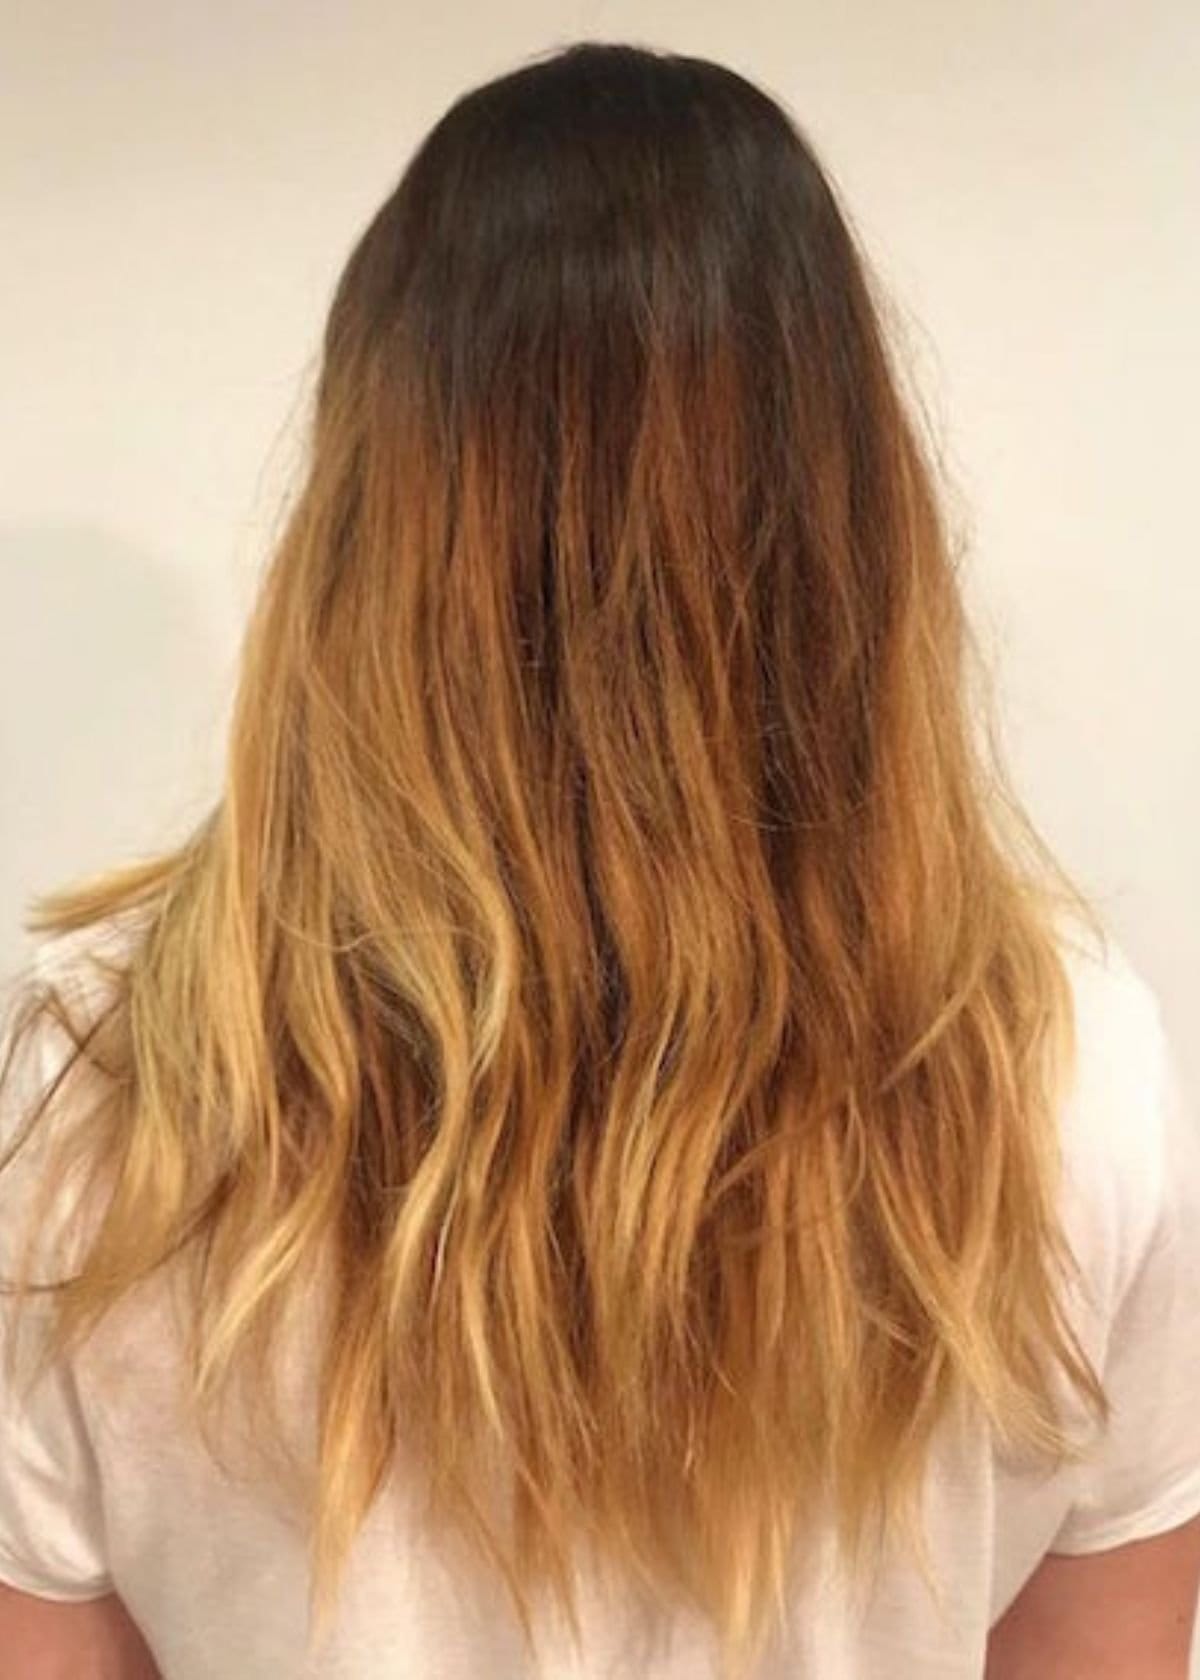 How to Get Rid of Brassy Hair without Toner?